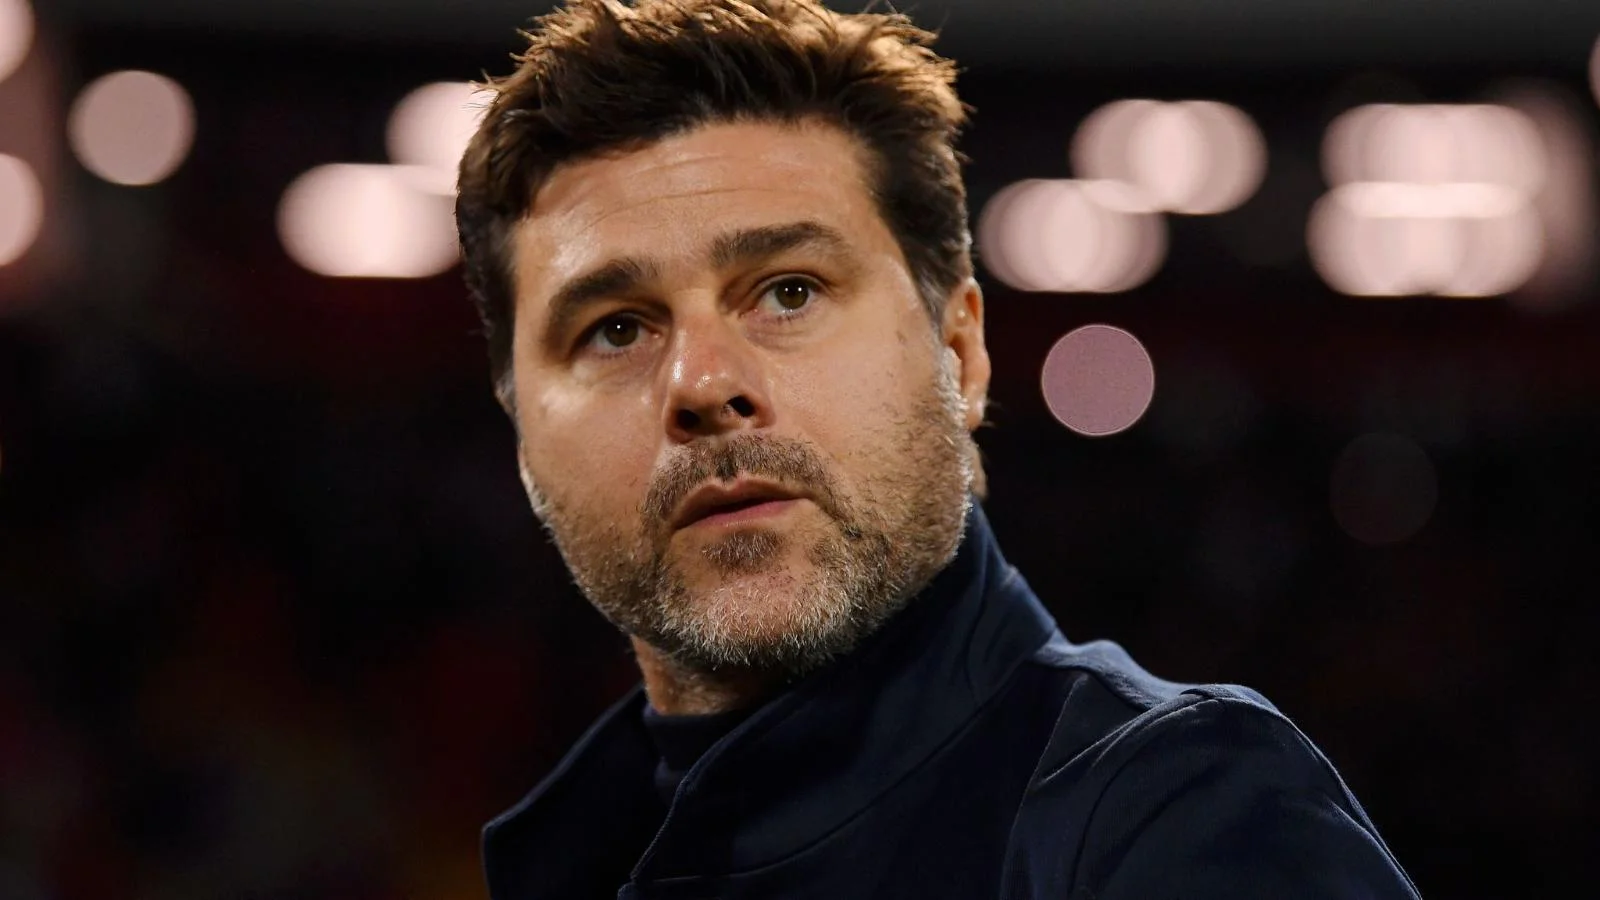 ‘I said hello’ – Pochettino dismisses claims he ignored Boehly after FA Cup final defeat